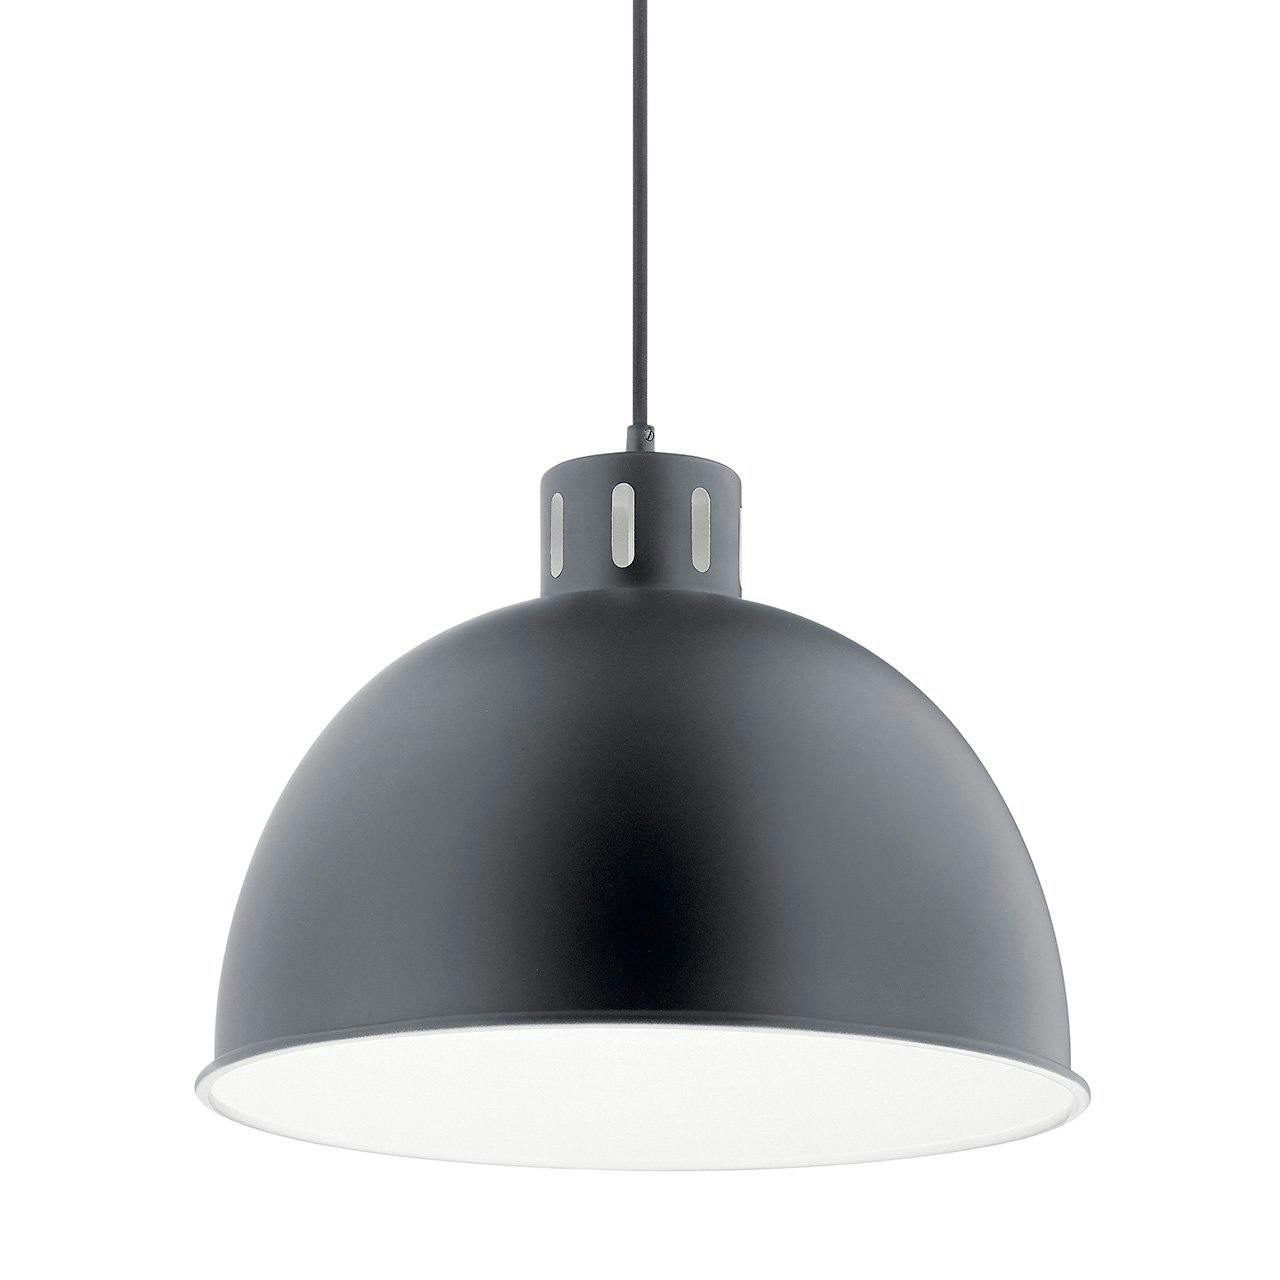 Zailey™ 15.75" 1 Light Pendant in Black without the canopy on a white background